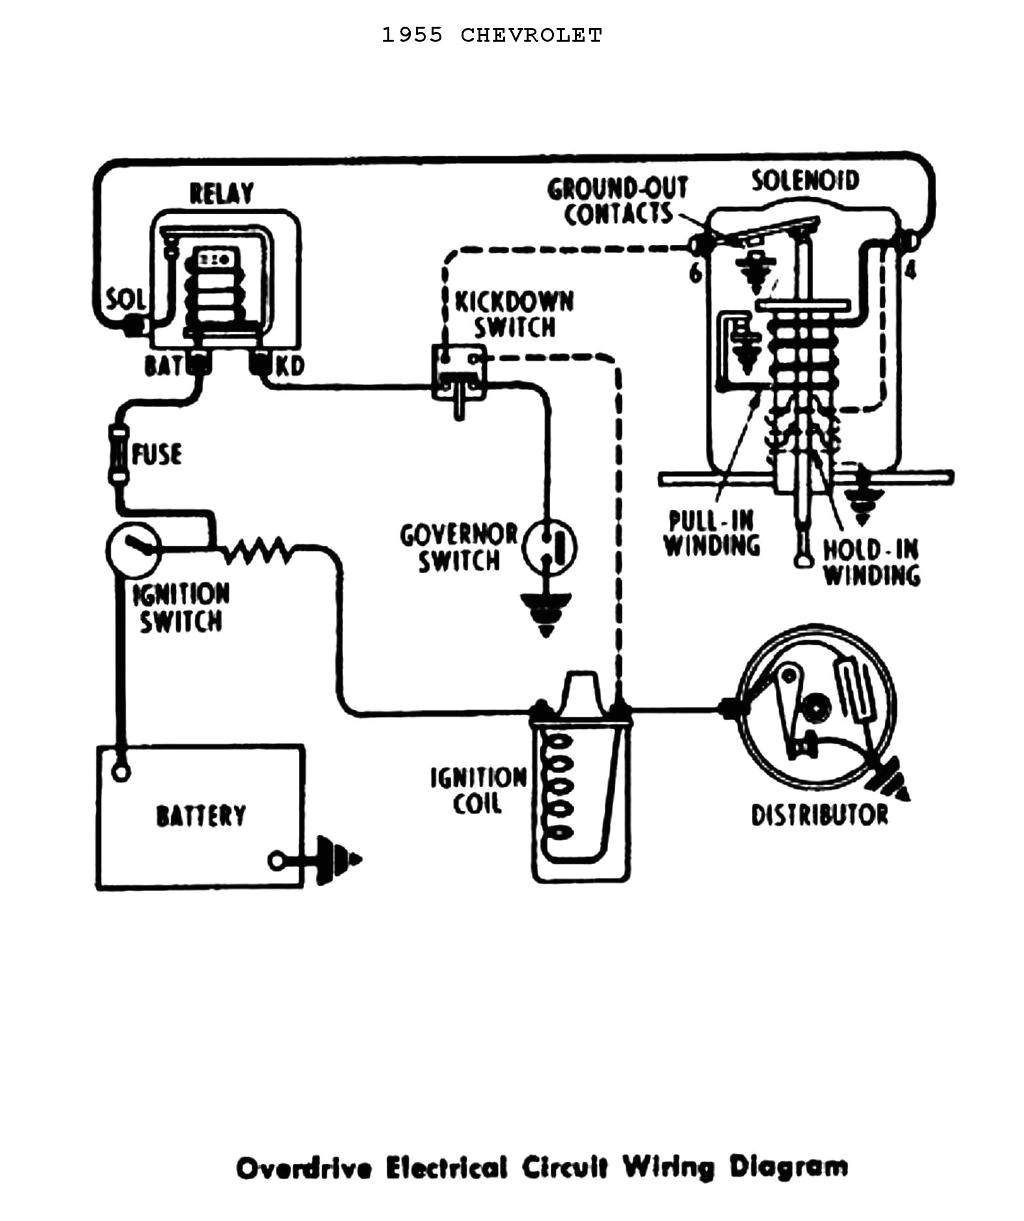 ford tractor ignition switch wiring diagram ford ignition coil wiring diagram ford ignition coil wiring diagram unique 1954 ford overdrive kickdown 14r jpg